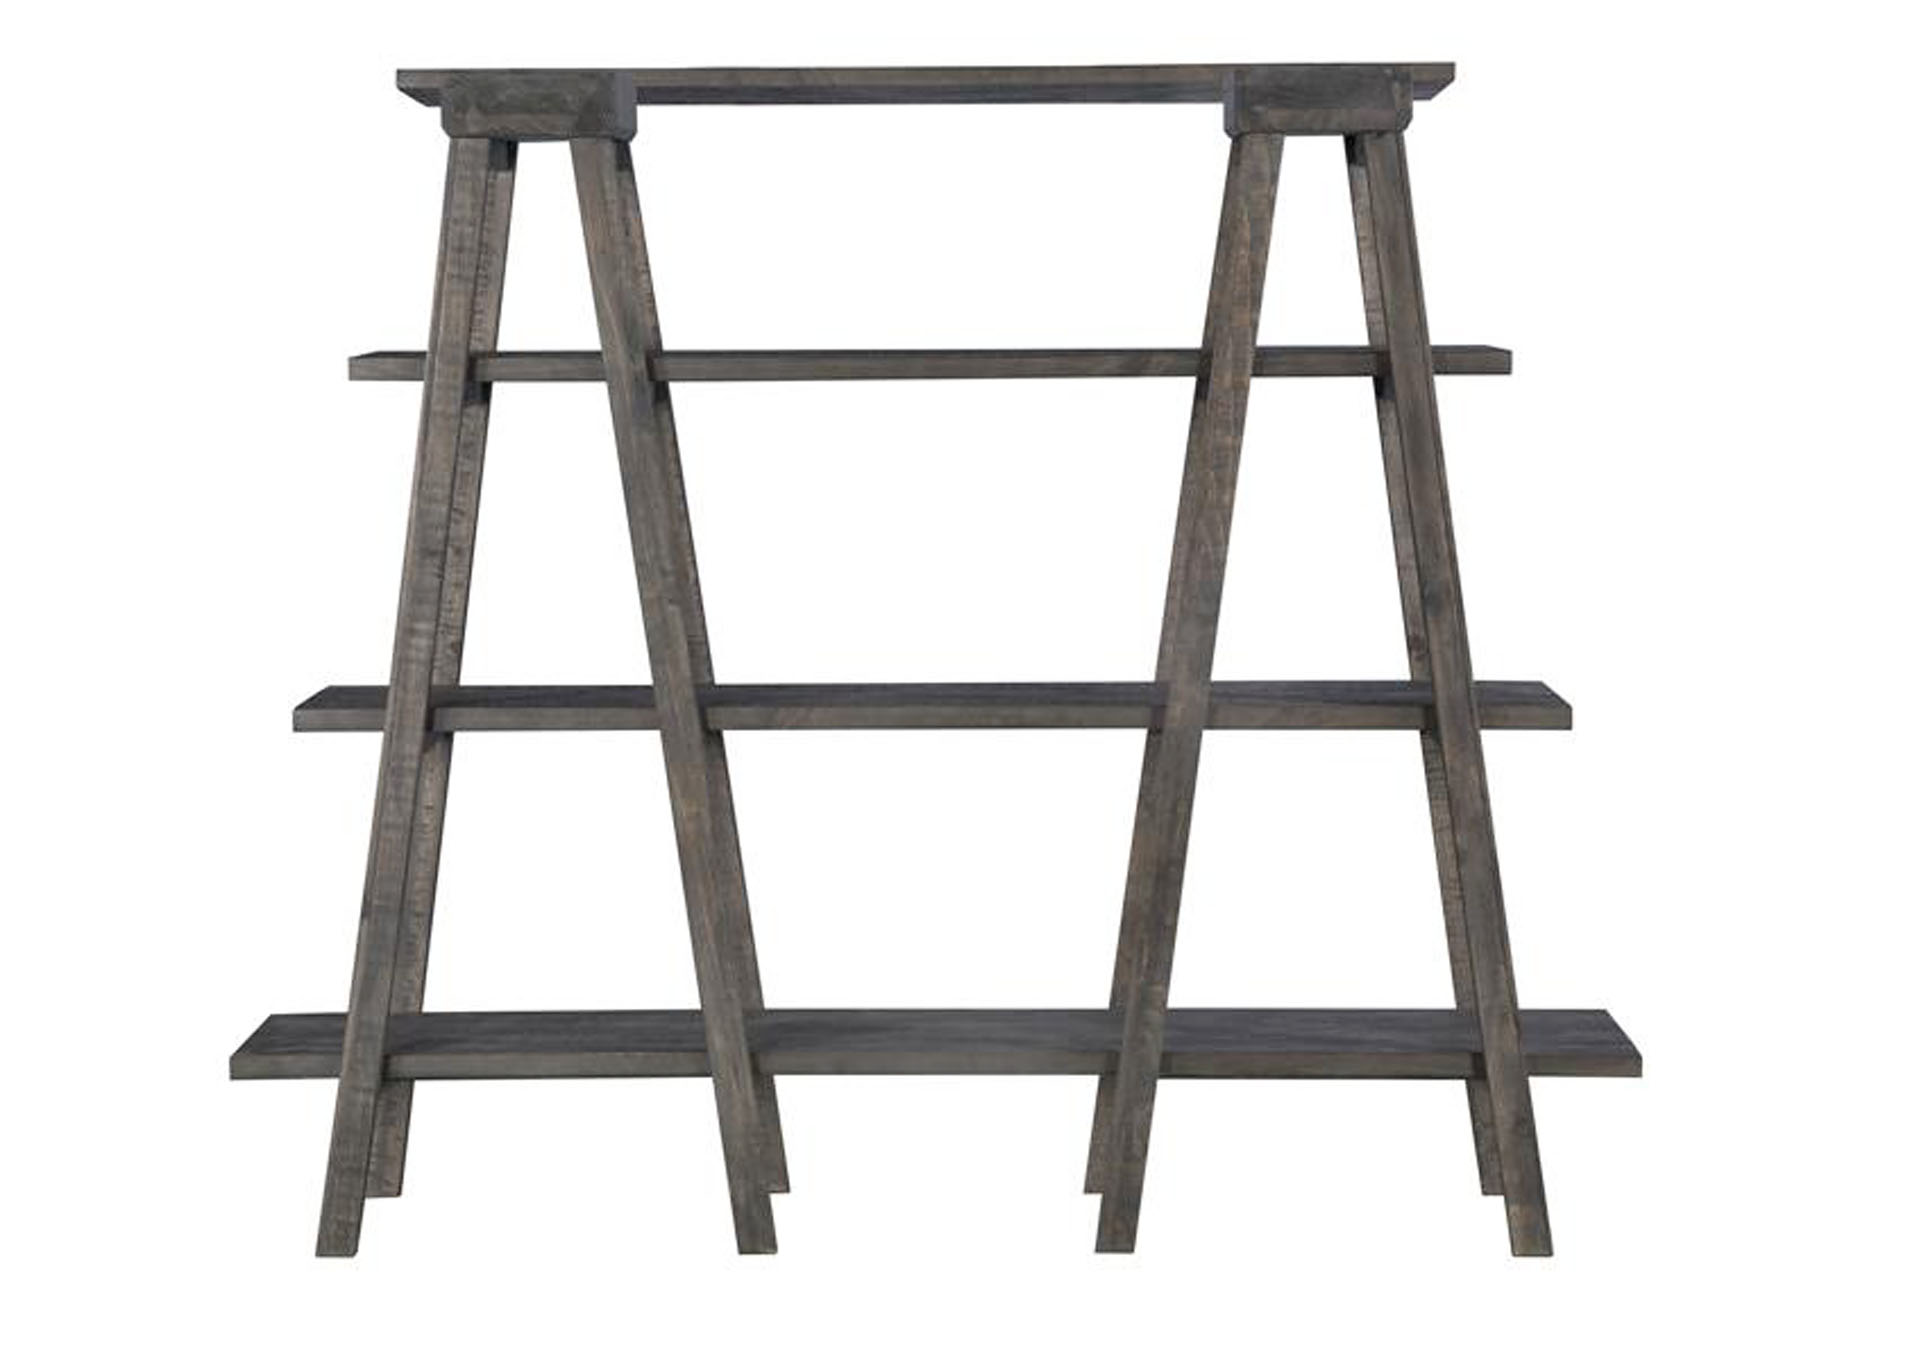 Sutton Place Weathered Charcoal Bookshelf,Magnussen